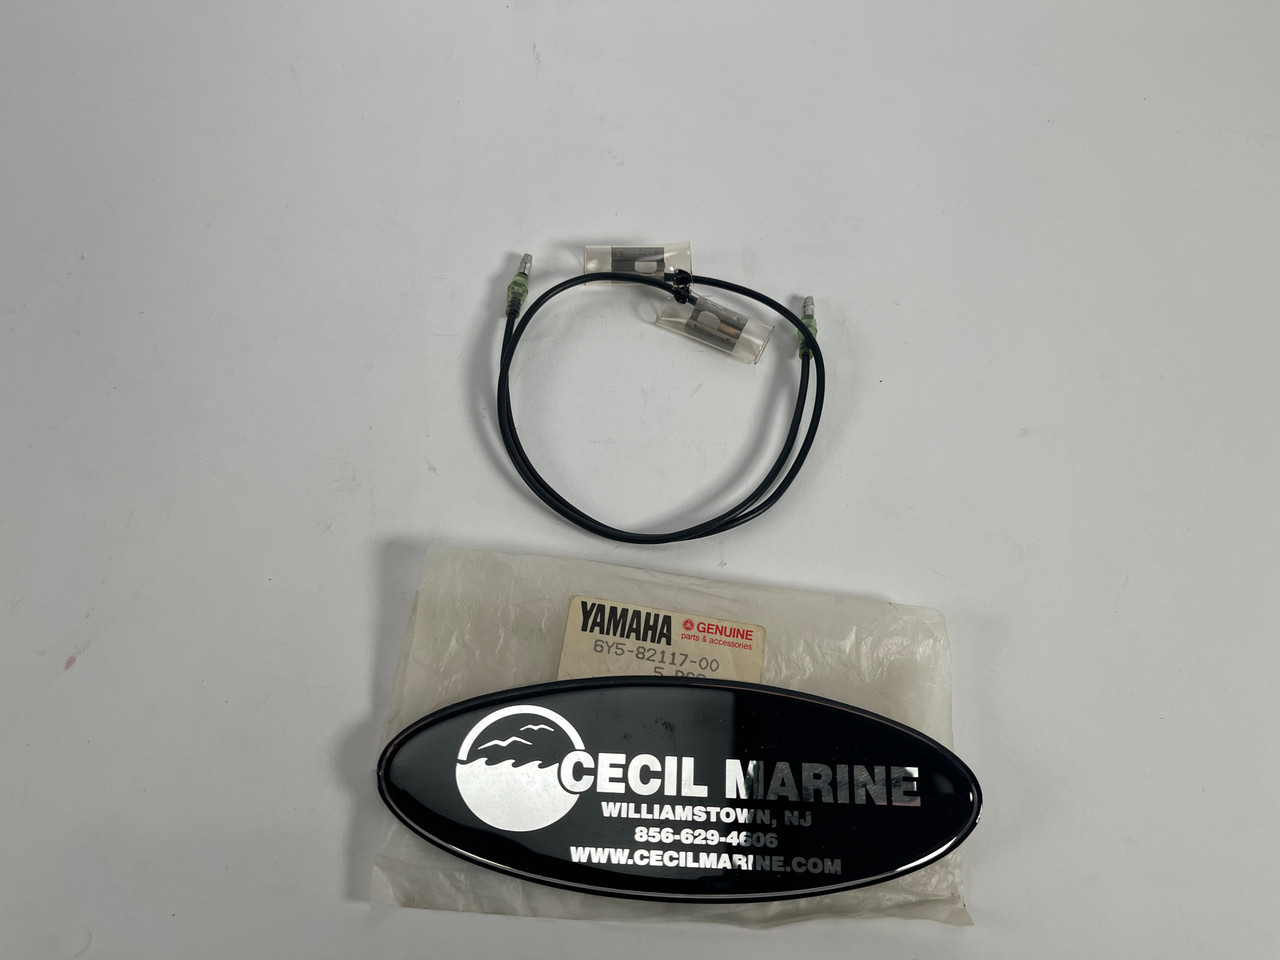 $7.99* GENUINE YAMAHA no tax* BLACK RIGGING 6Y5-82117-00-00 *In Stock & Ready To Ship